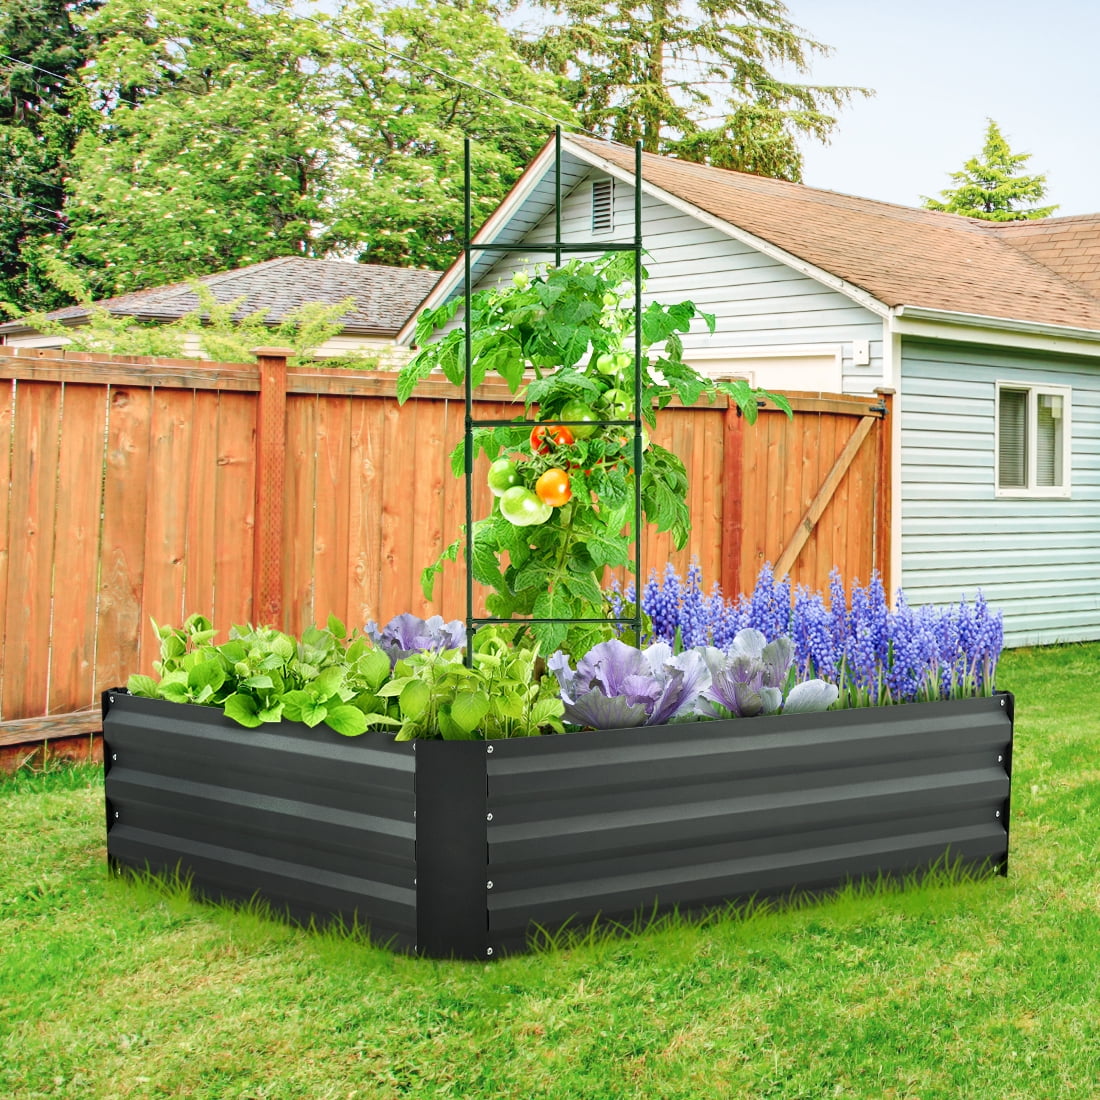 Bottomless Metal Planter Box Vegetabes Flowers Herbs Backyard Patio Quictent Galvanized Raised Garden Bed 6x3x2 Ft with 3 pcs Tomato Cage 1 pc Weed Barrier Gloves 